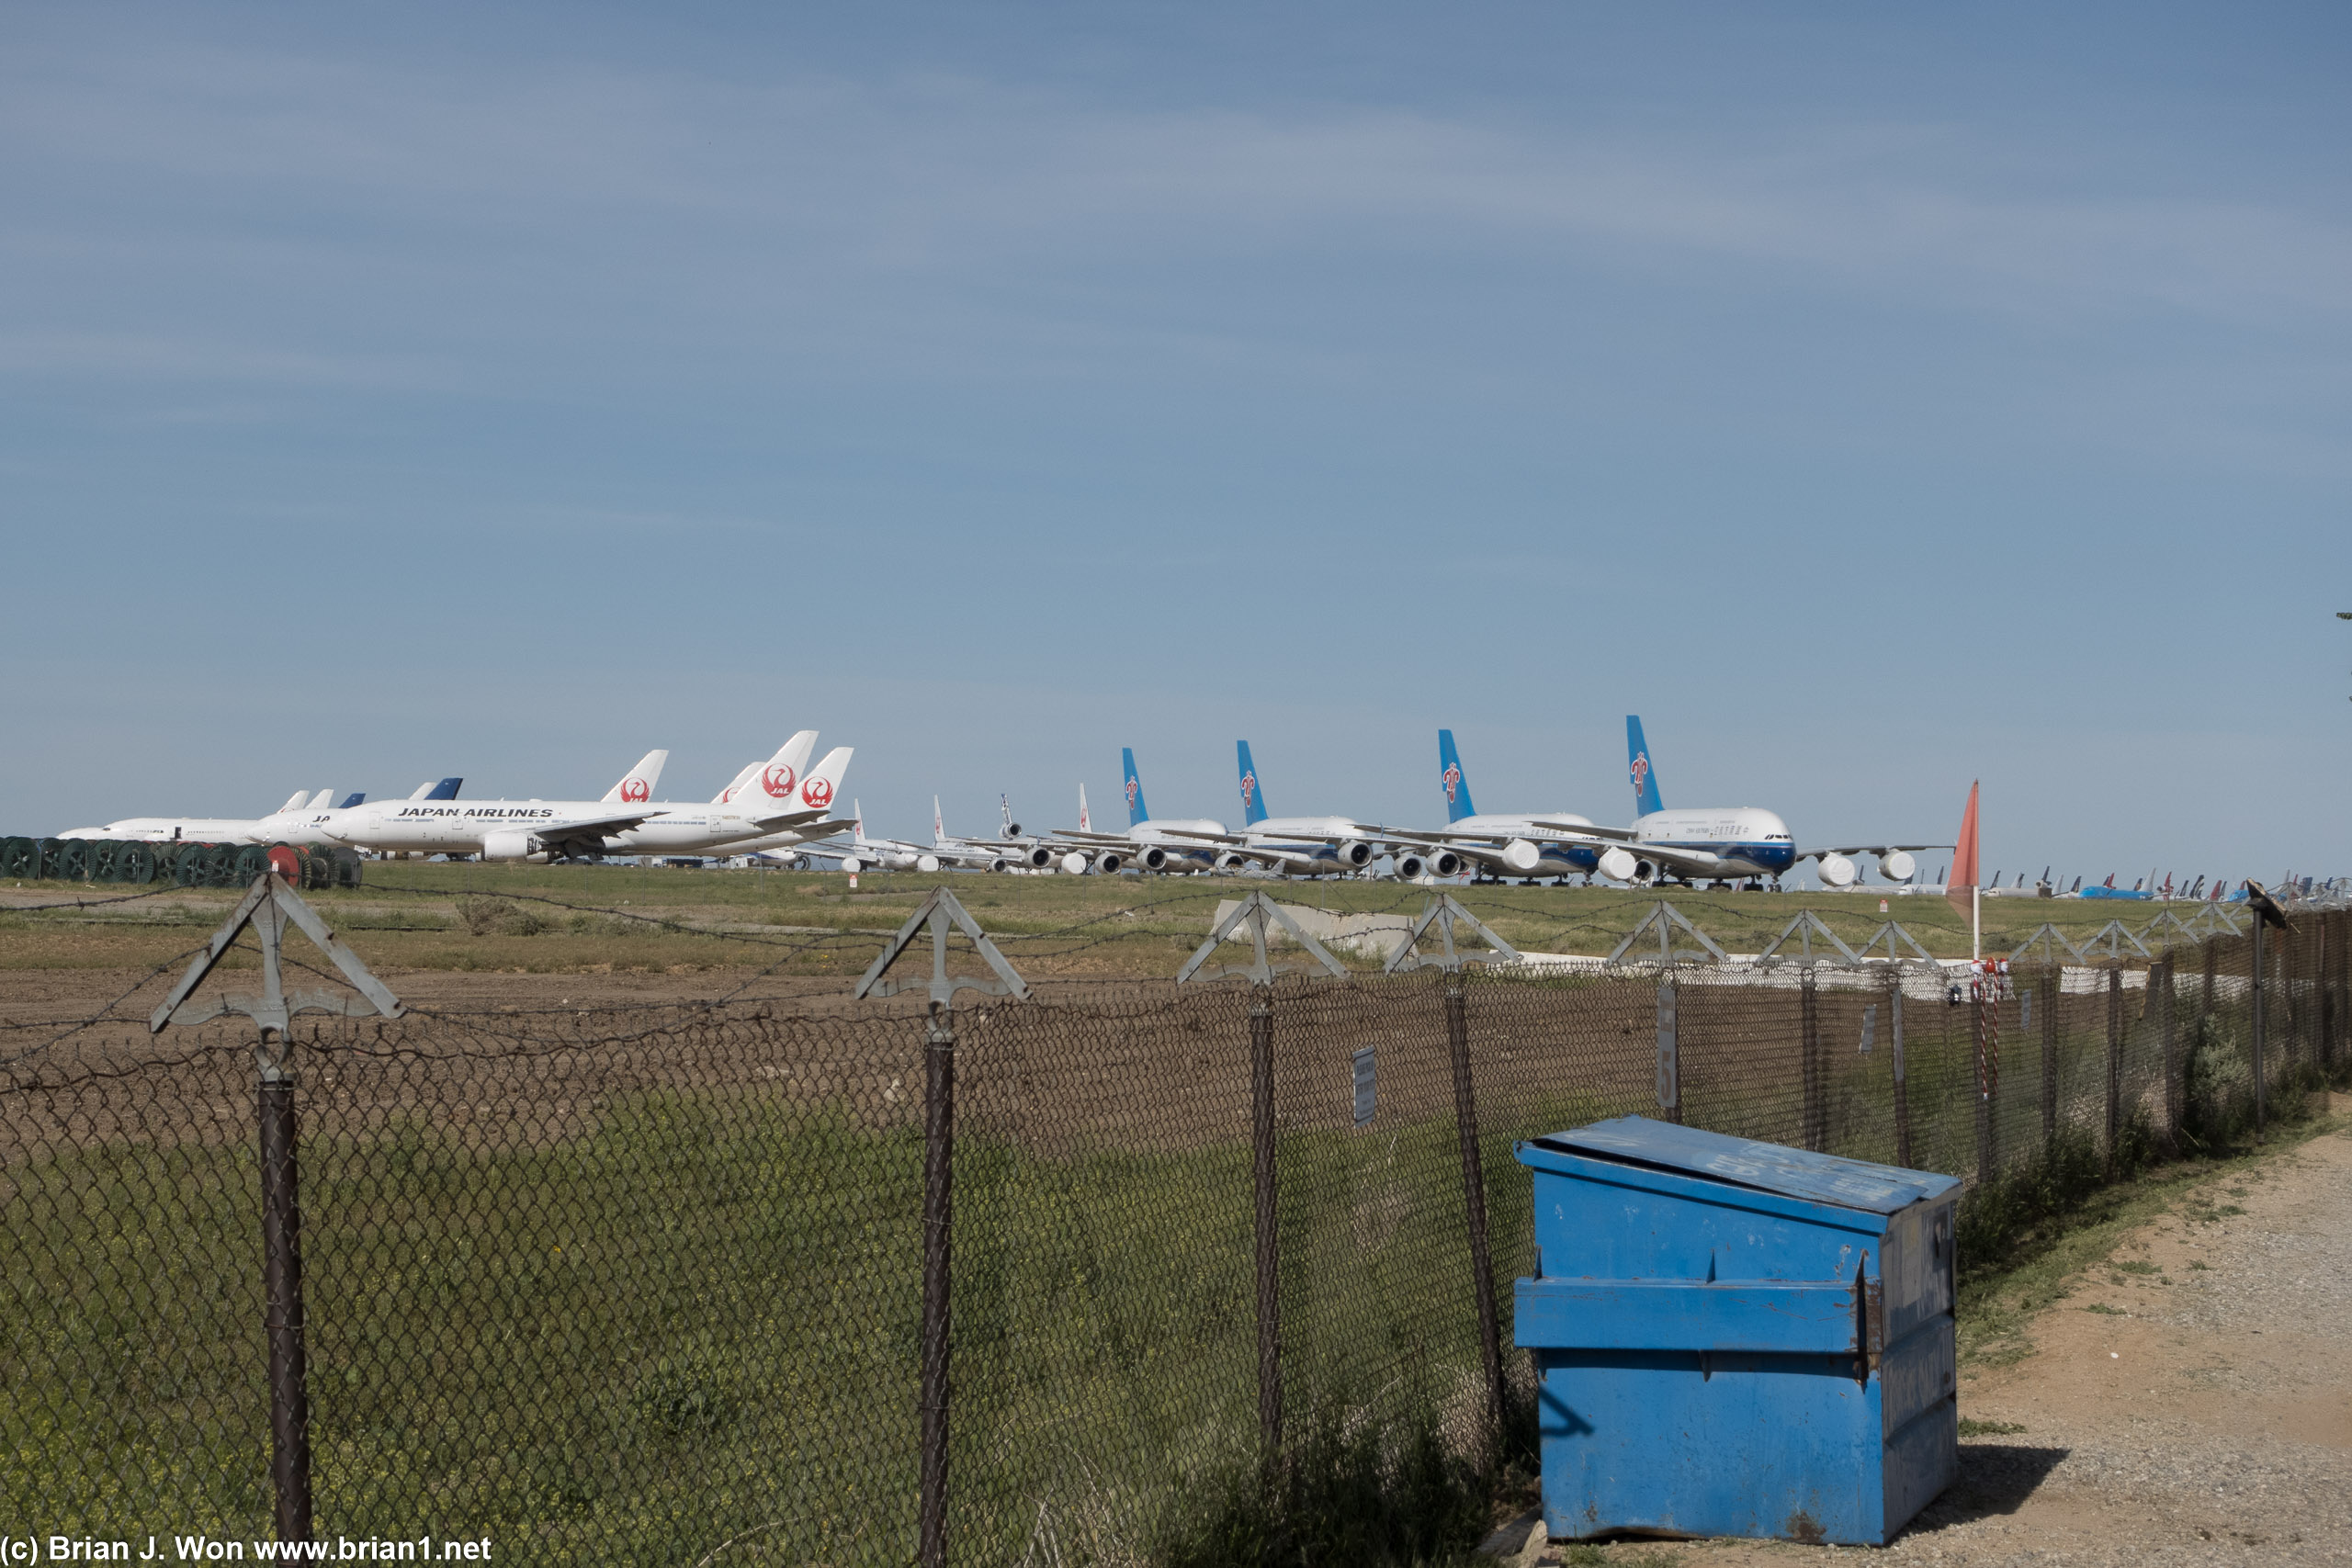 Mojave Air and Space Port's airplane graveyard. Boeing 777-200ER's and Airbus A380-800's.